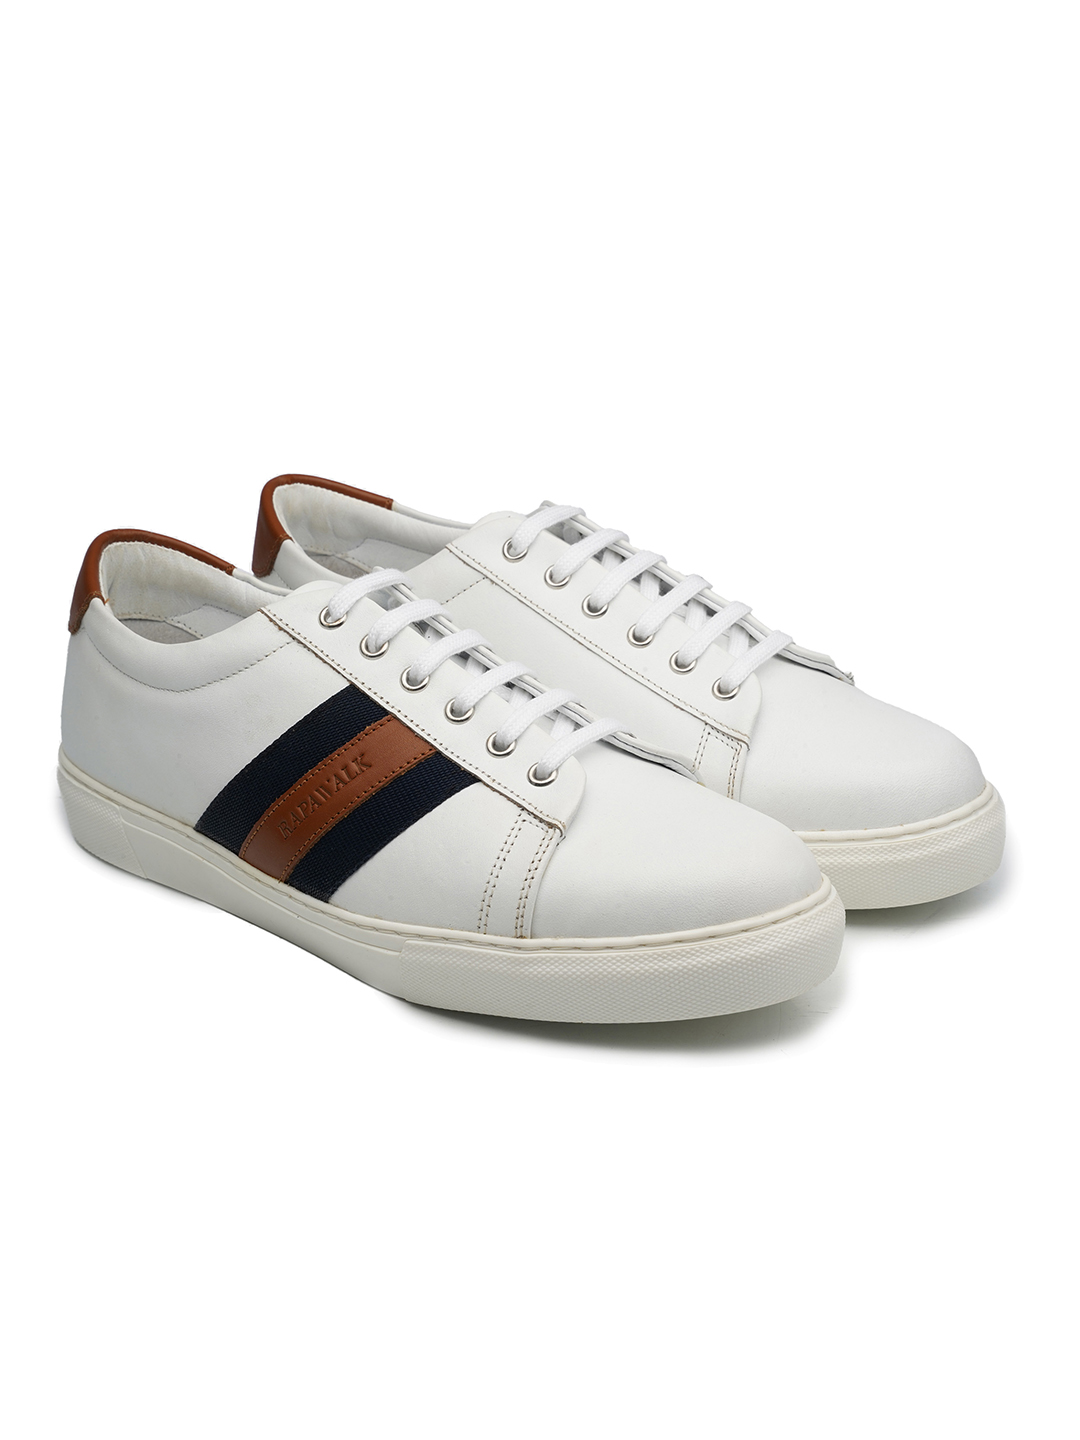 Louis -Vuitton Ollie Men sneakers, Size 9.5 LV- 10.5 US- Brand NEW